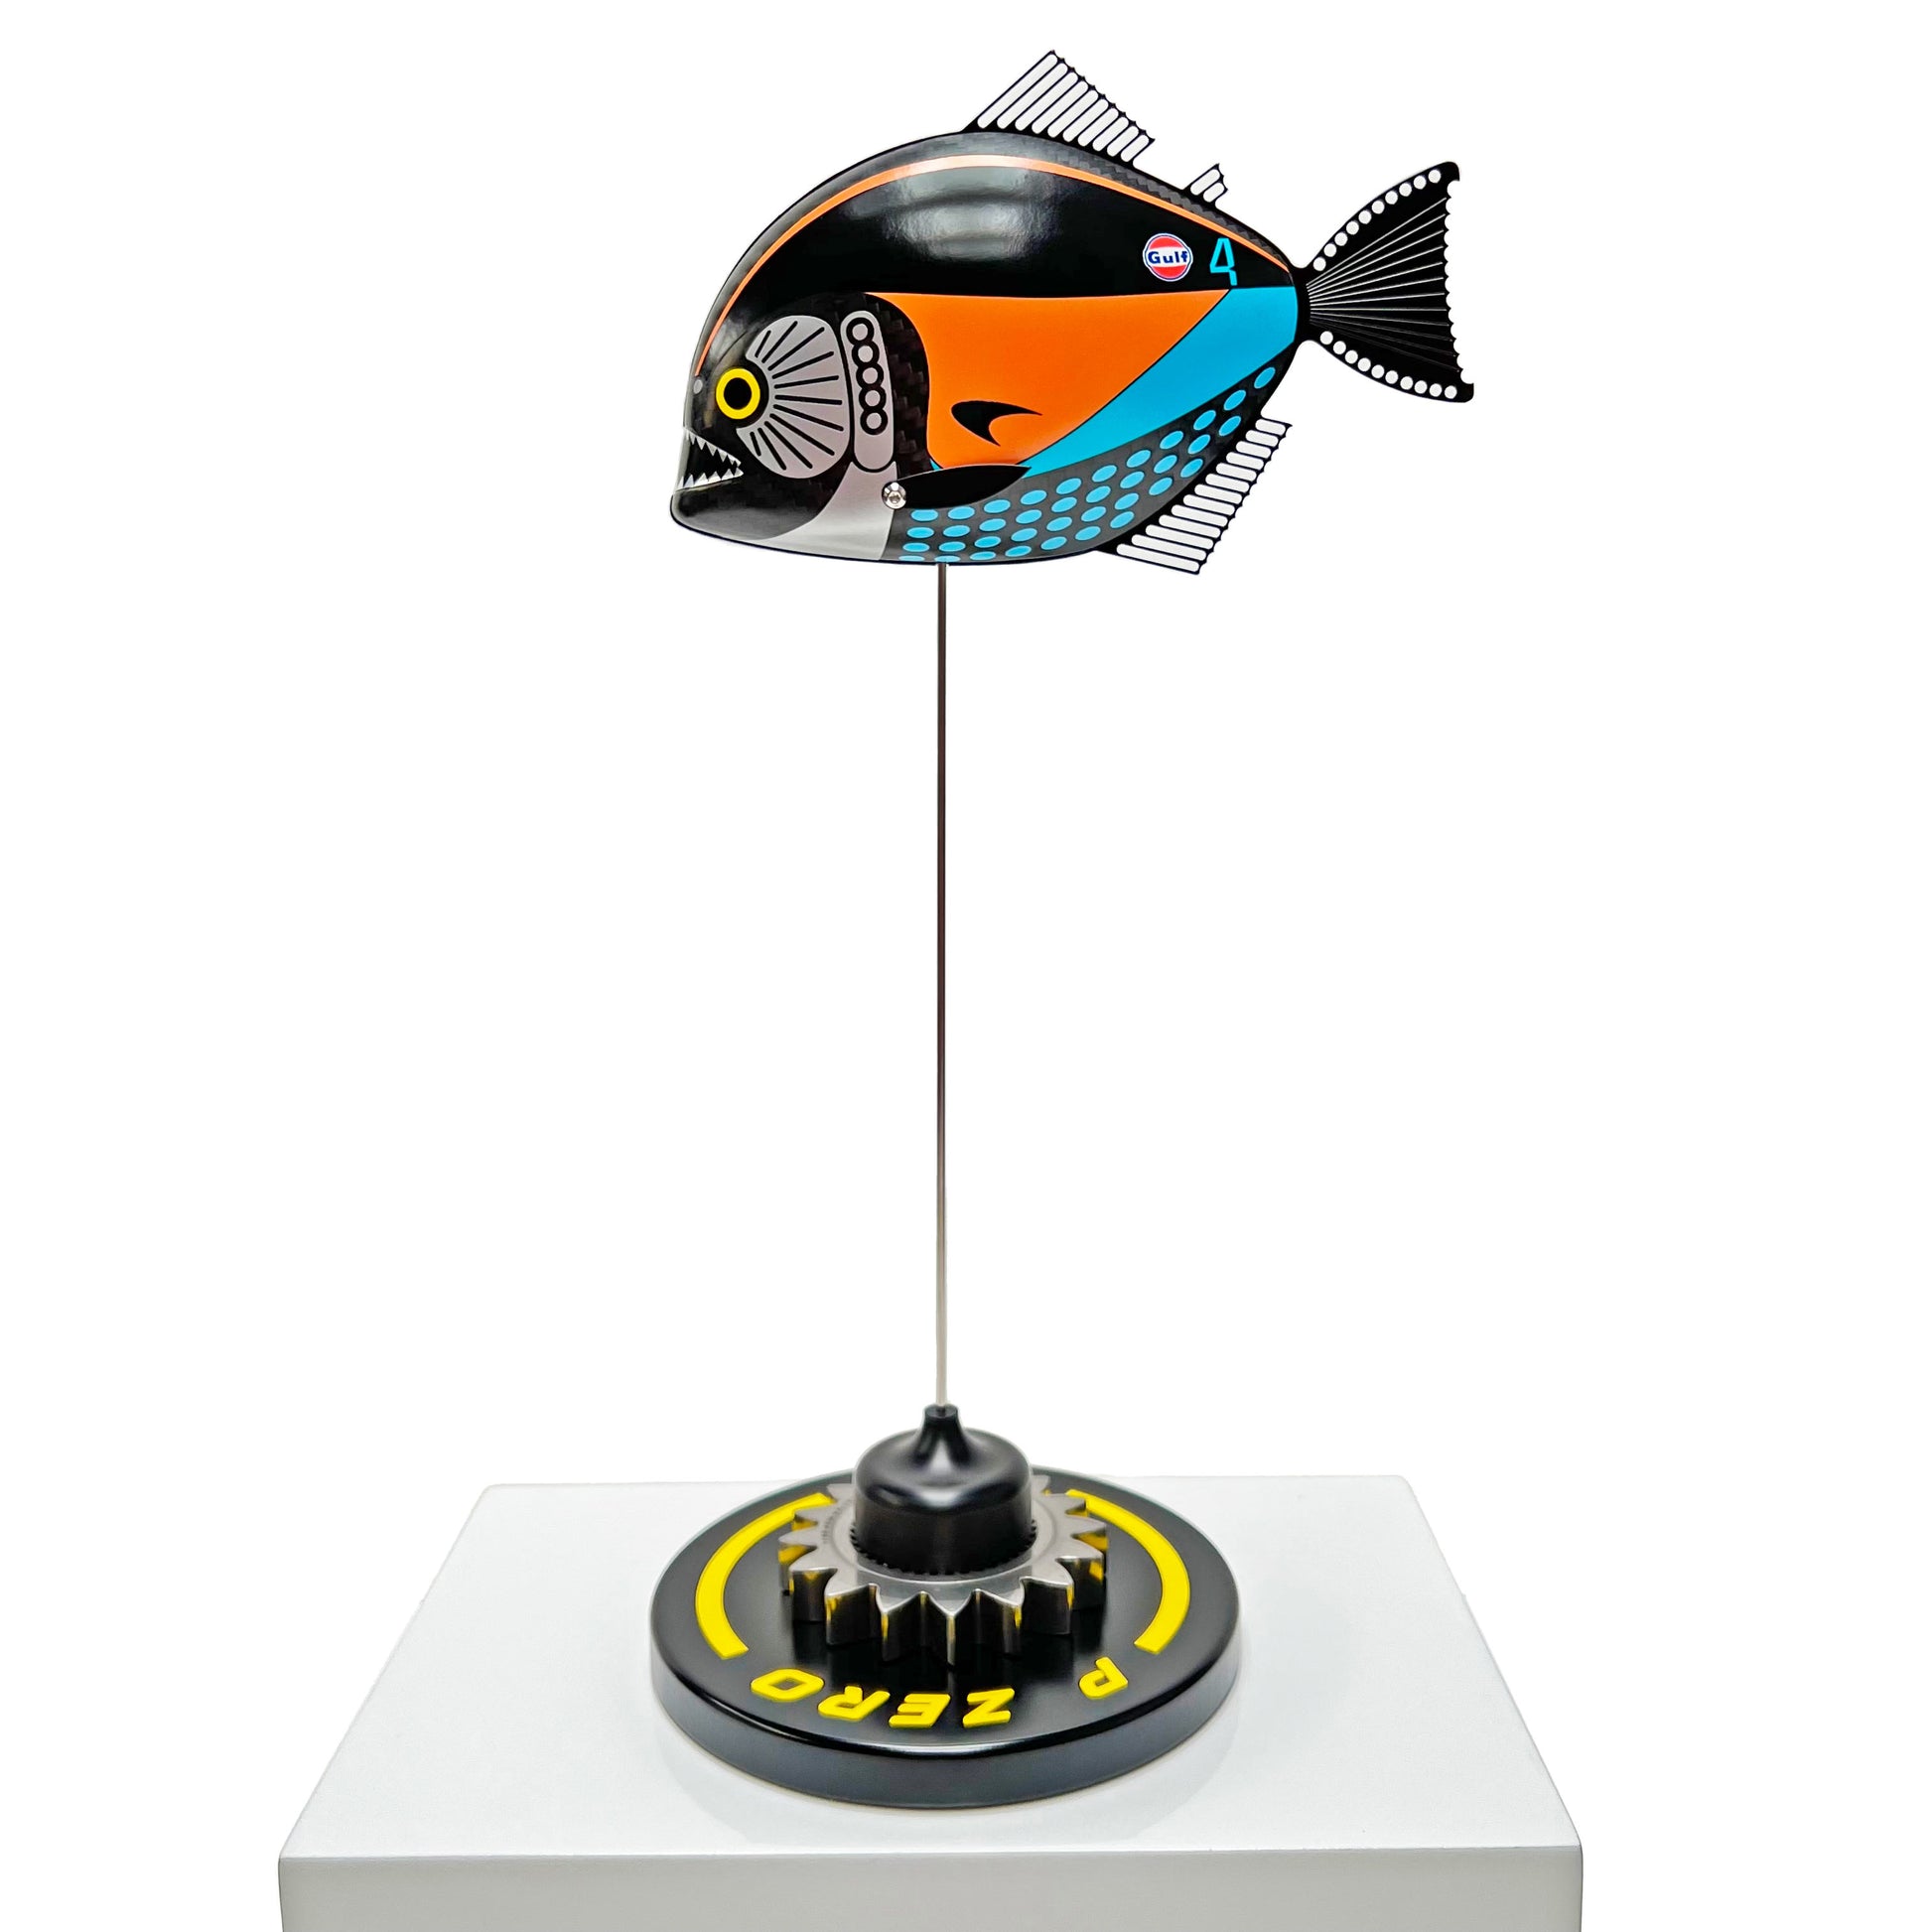 Carbon fibre Piranha sculpture with McLaren livery on a black base with F1 gear